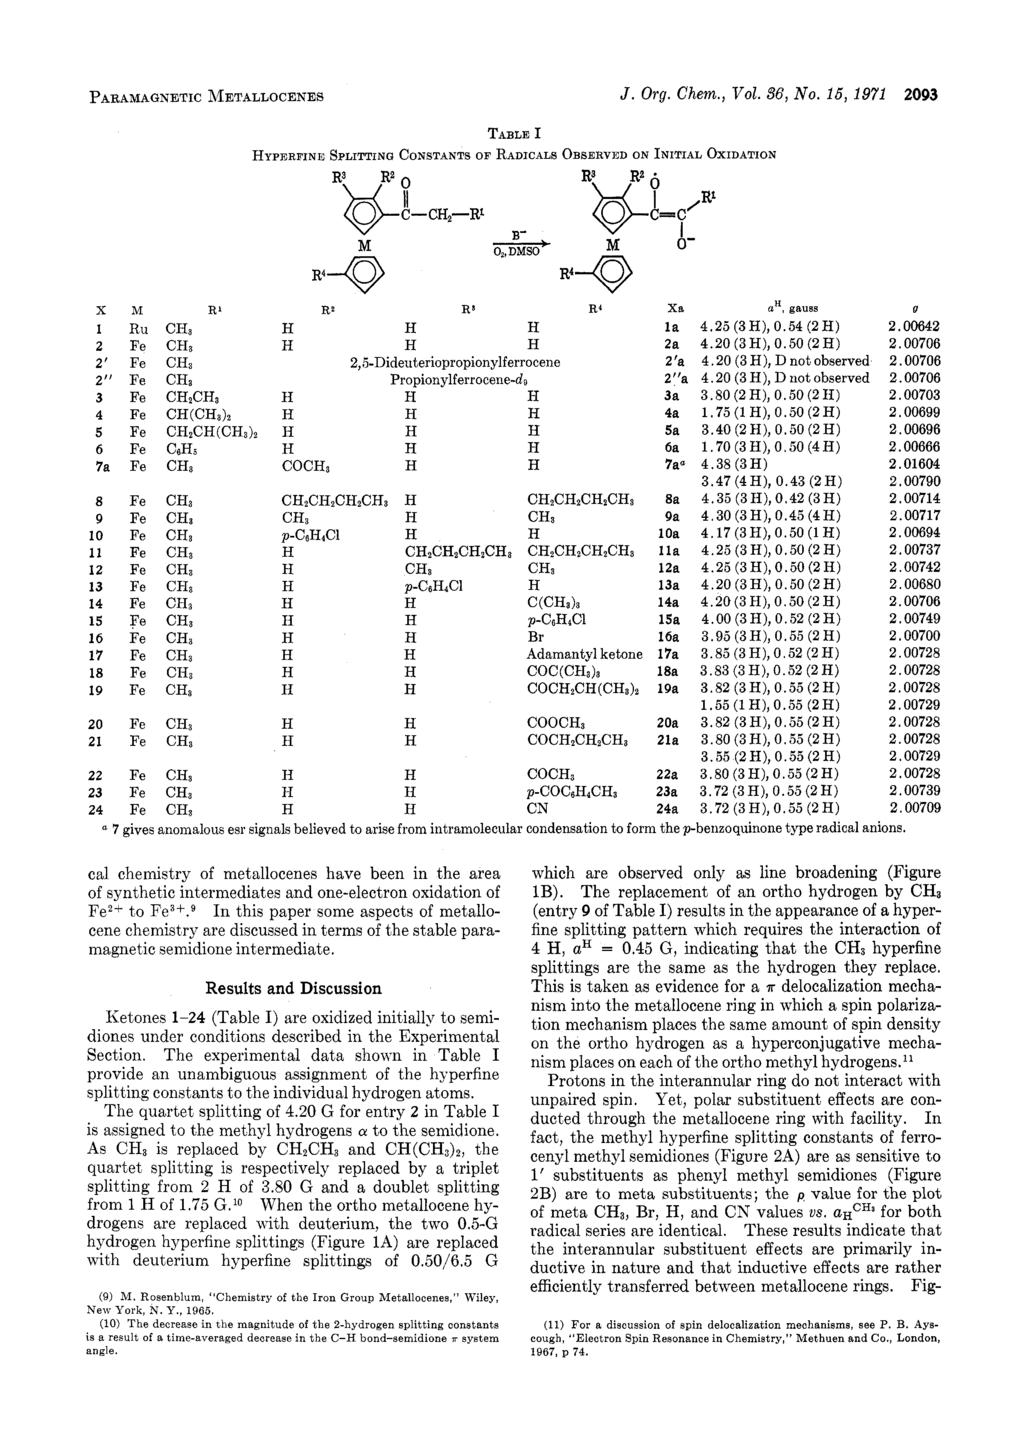 PARAMAGNETC &fetallocenes J. Org. Chem., Vol. 36, No. 16, 1971 293 TABLE HYPERFNE SPLTTNG CONSTANTS OF RADCALS OBSERVED ON NTAL OXDATON R3 R 4 3 C- B.